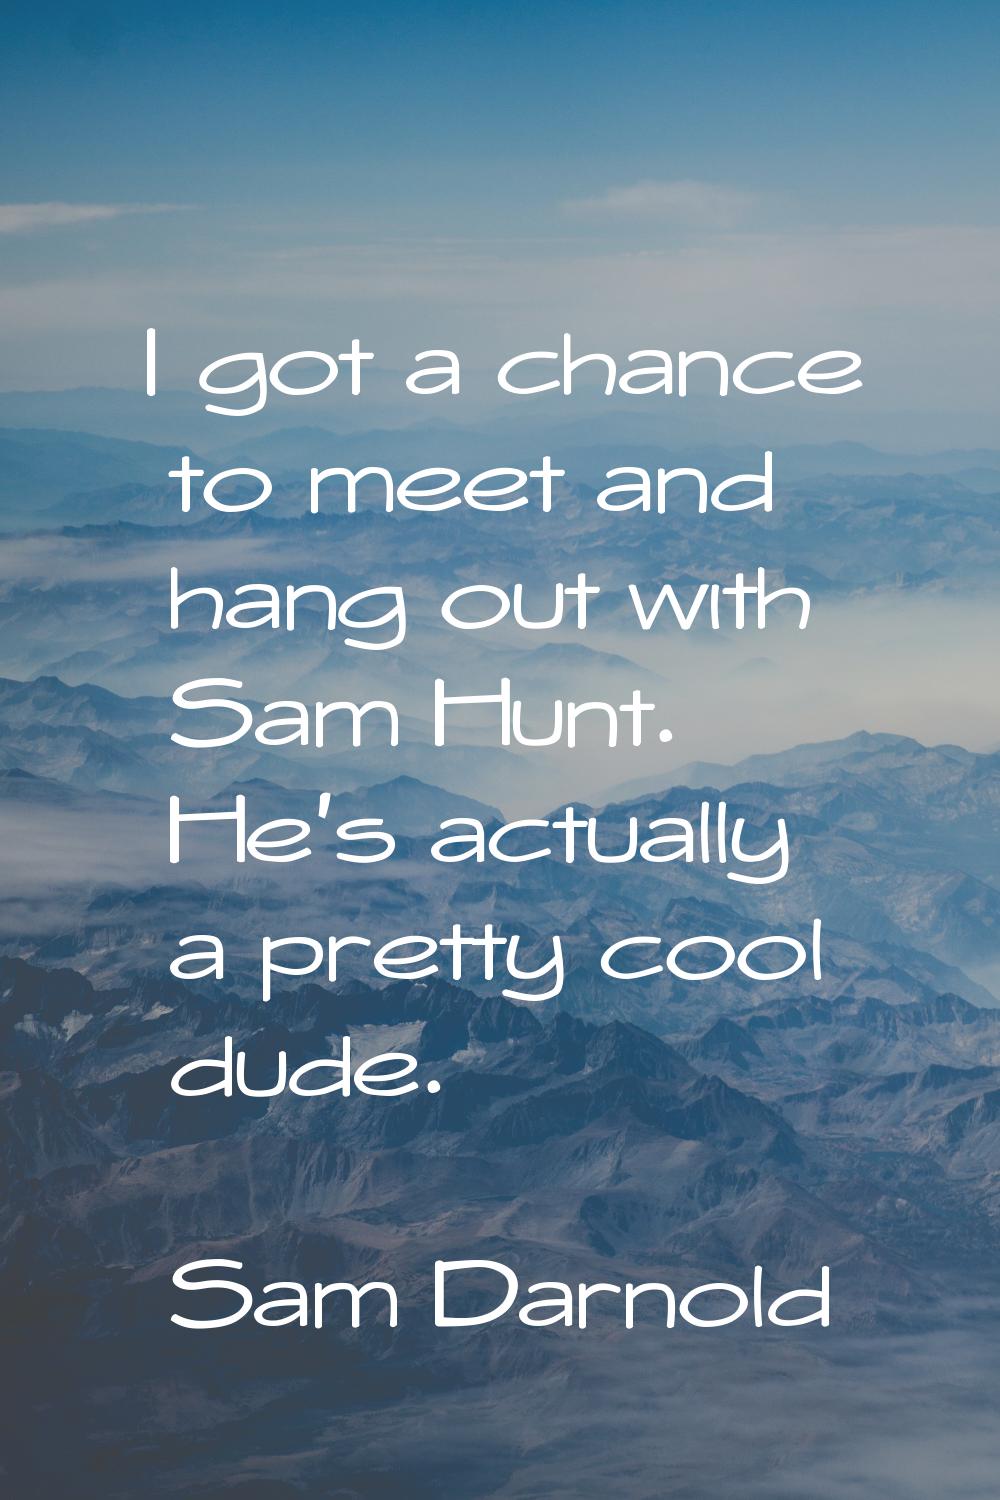 I got a chance to meet and hang out with Sam Hunt. He's actually a pretty cool dude.